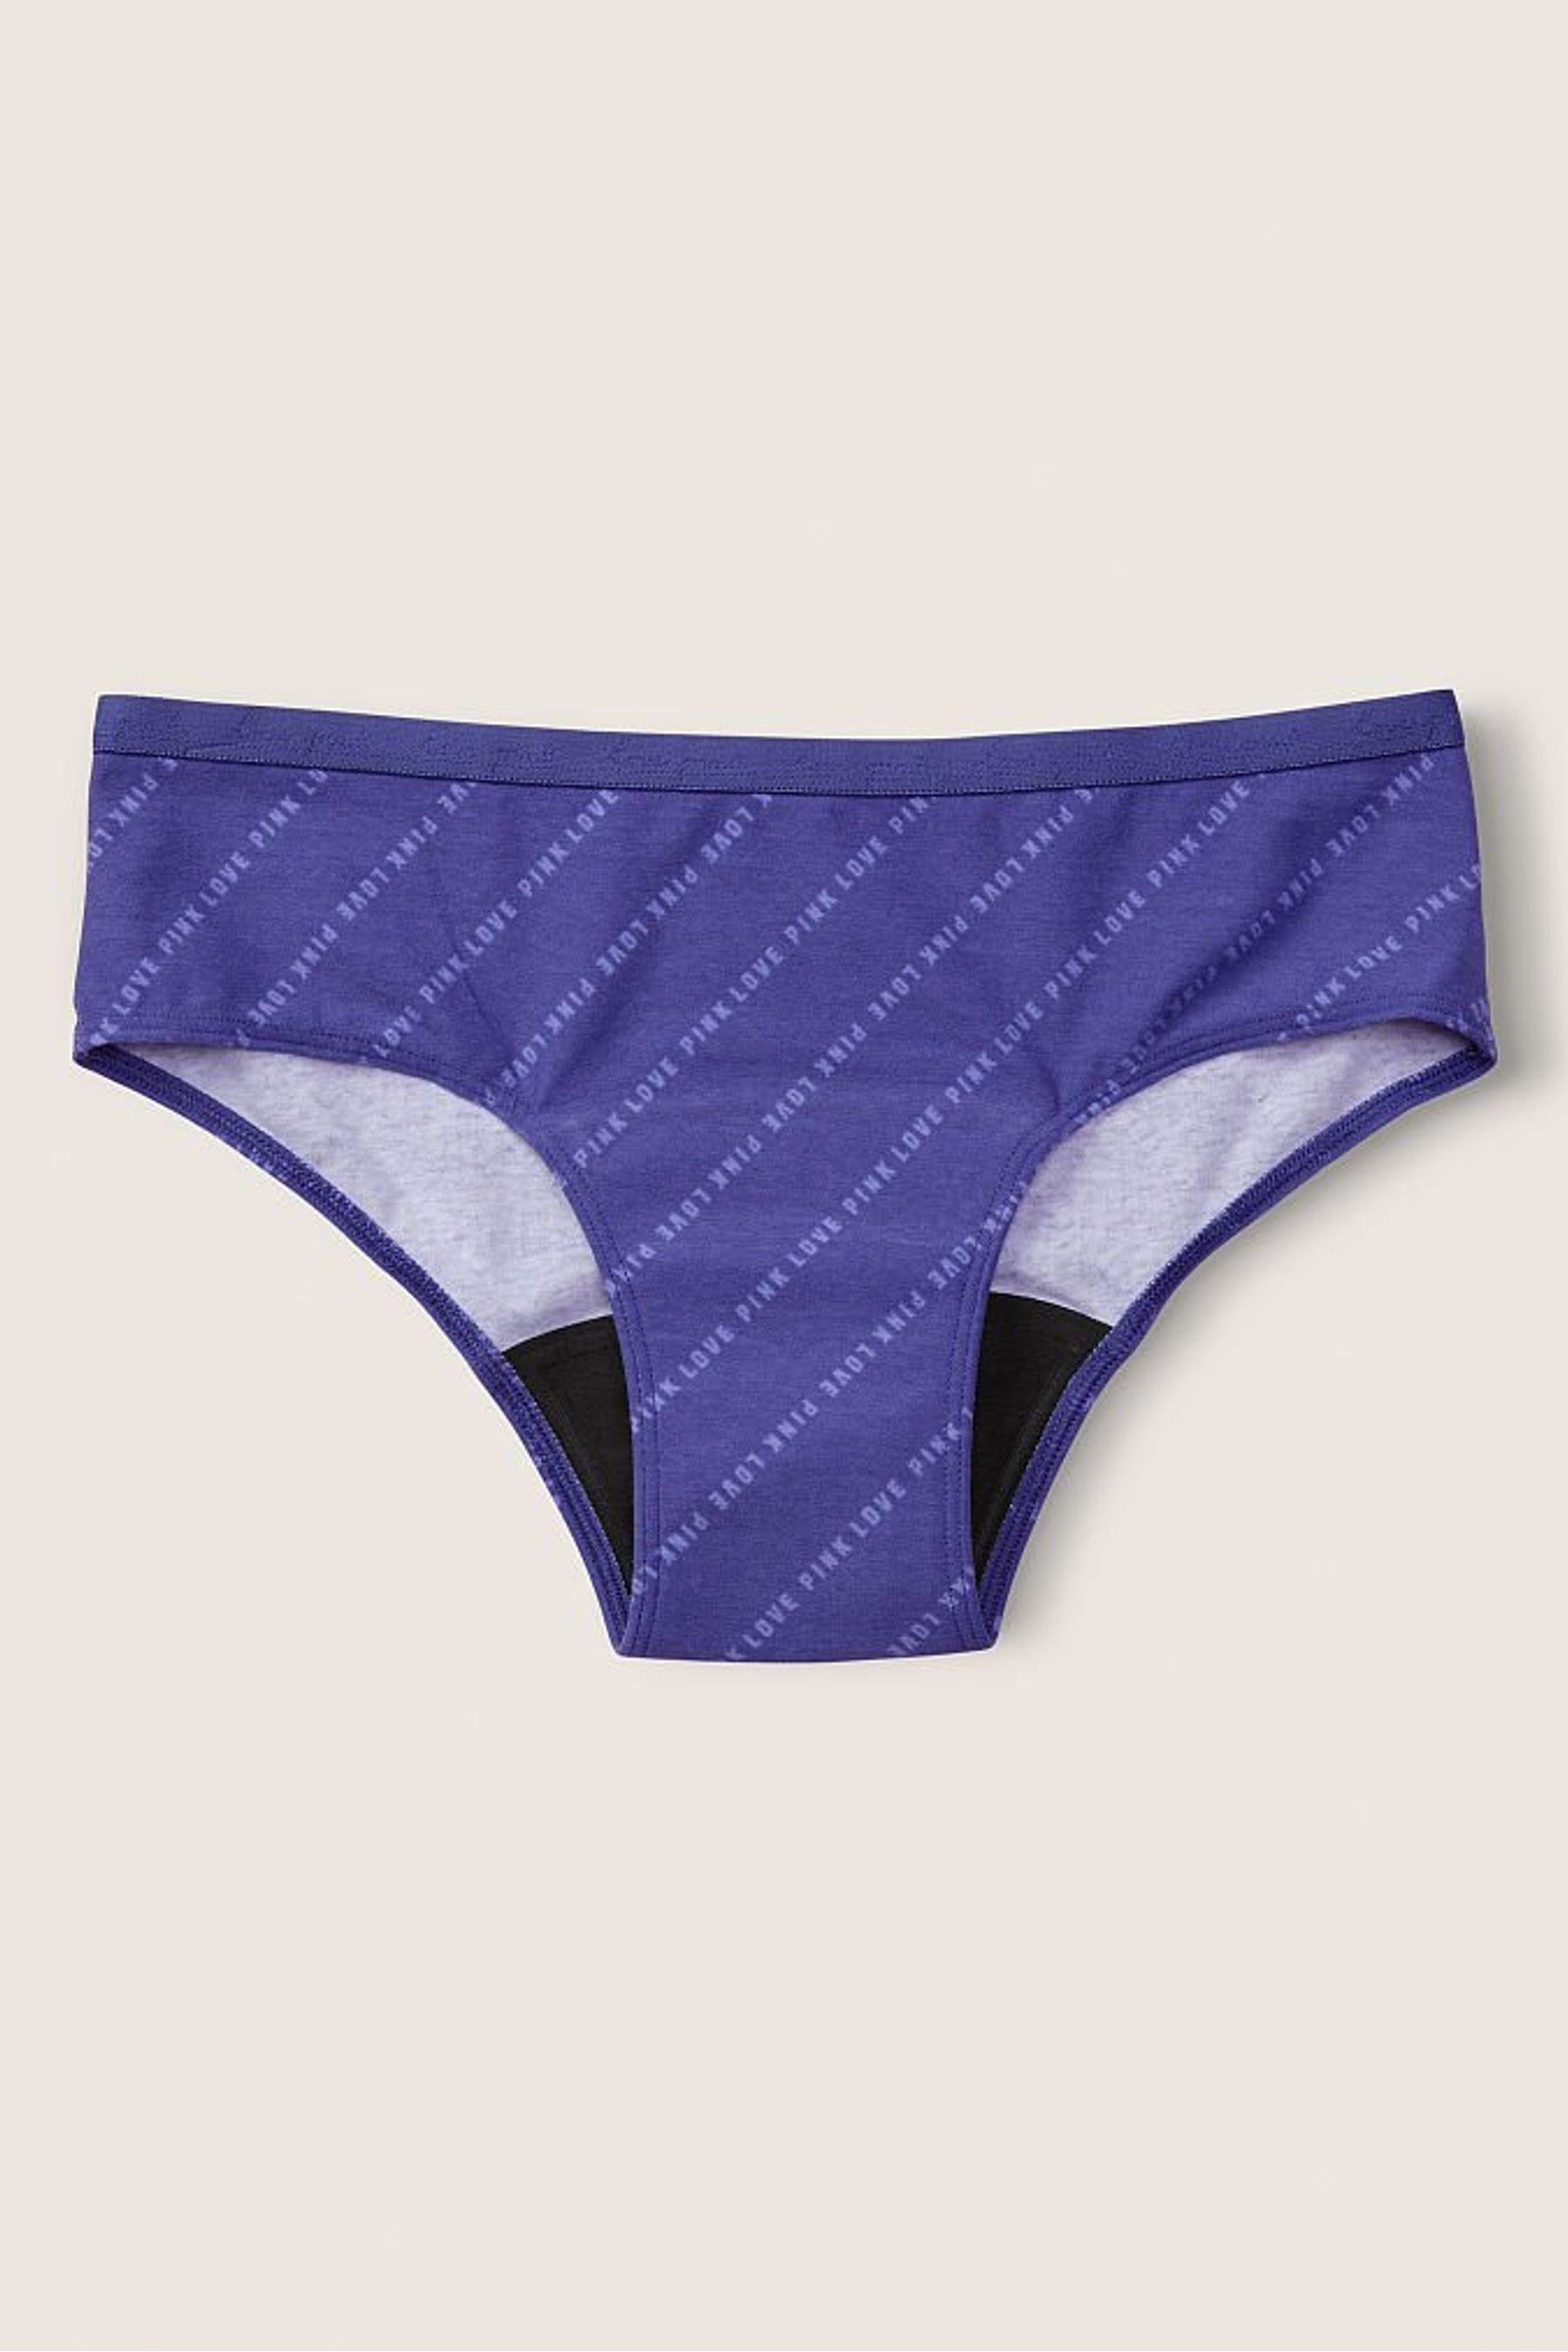 Buy Victoria's Secret PINK Cotton Period Hipster Panty from the ...